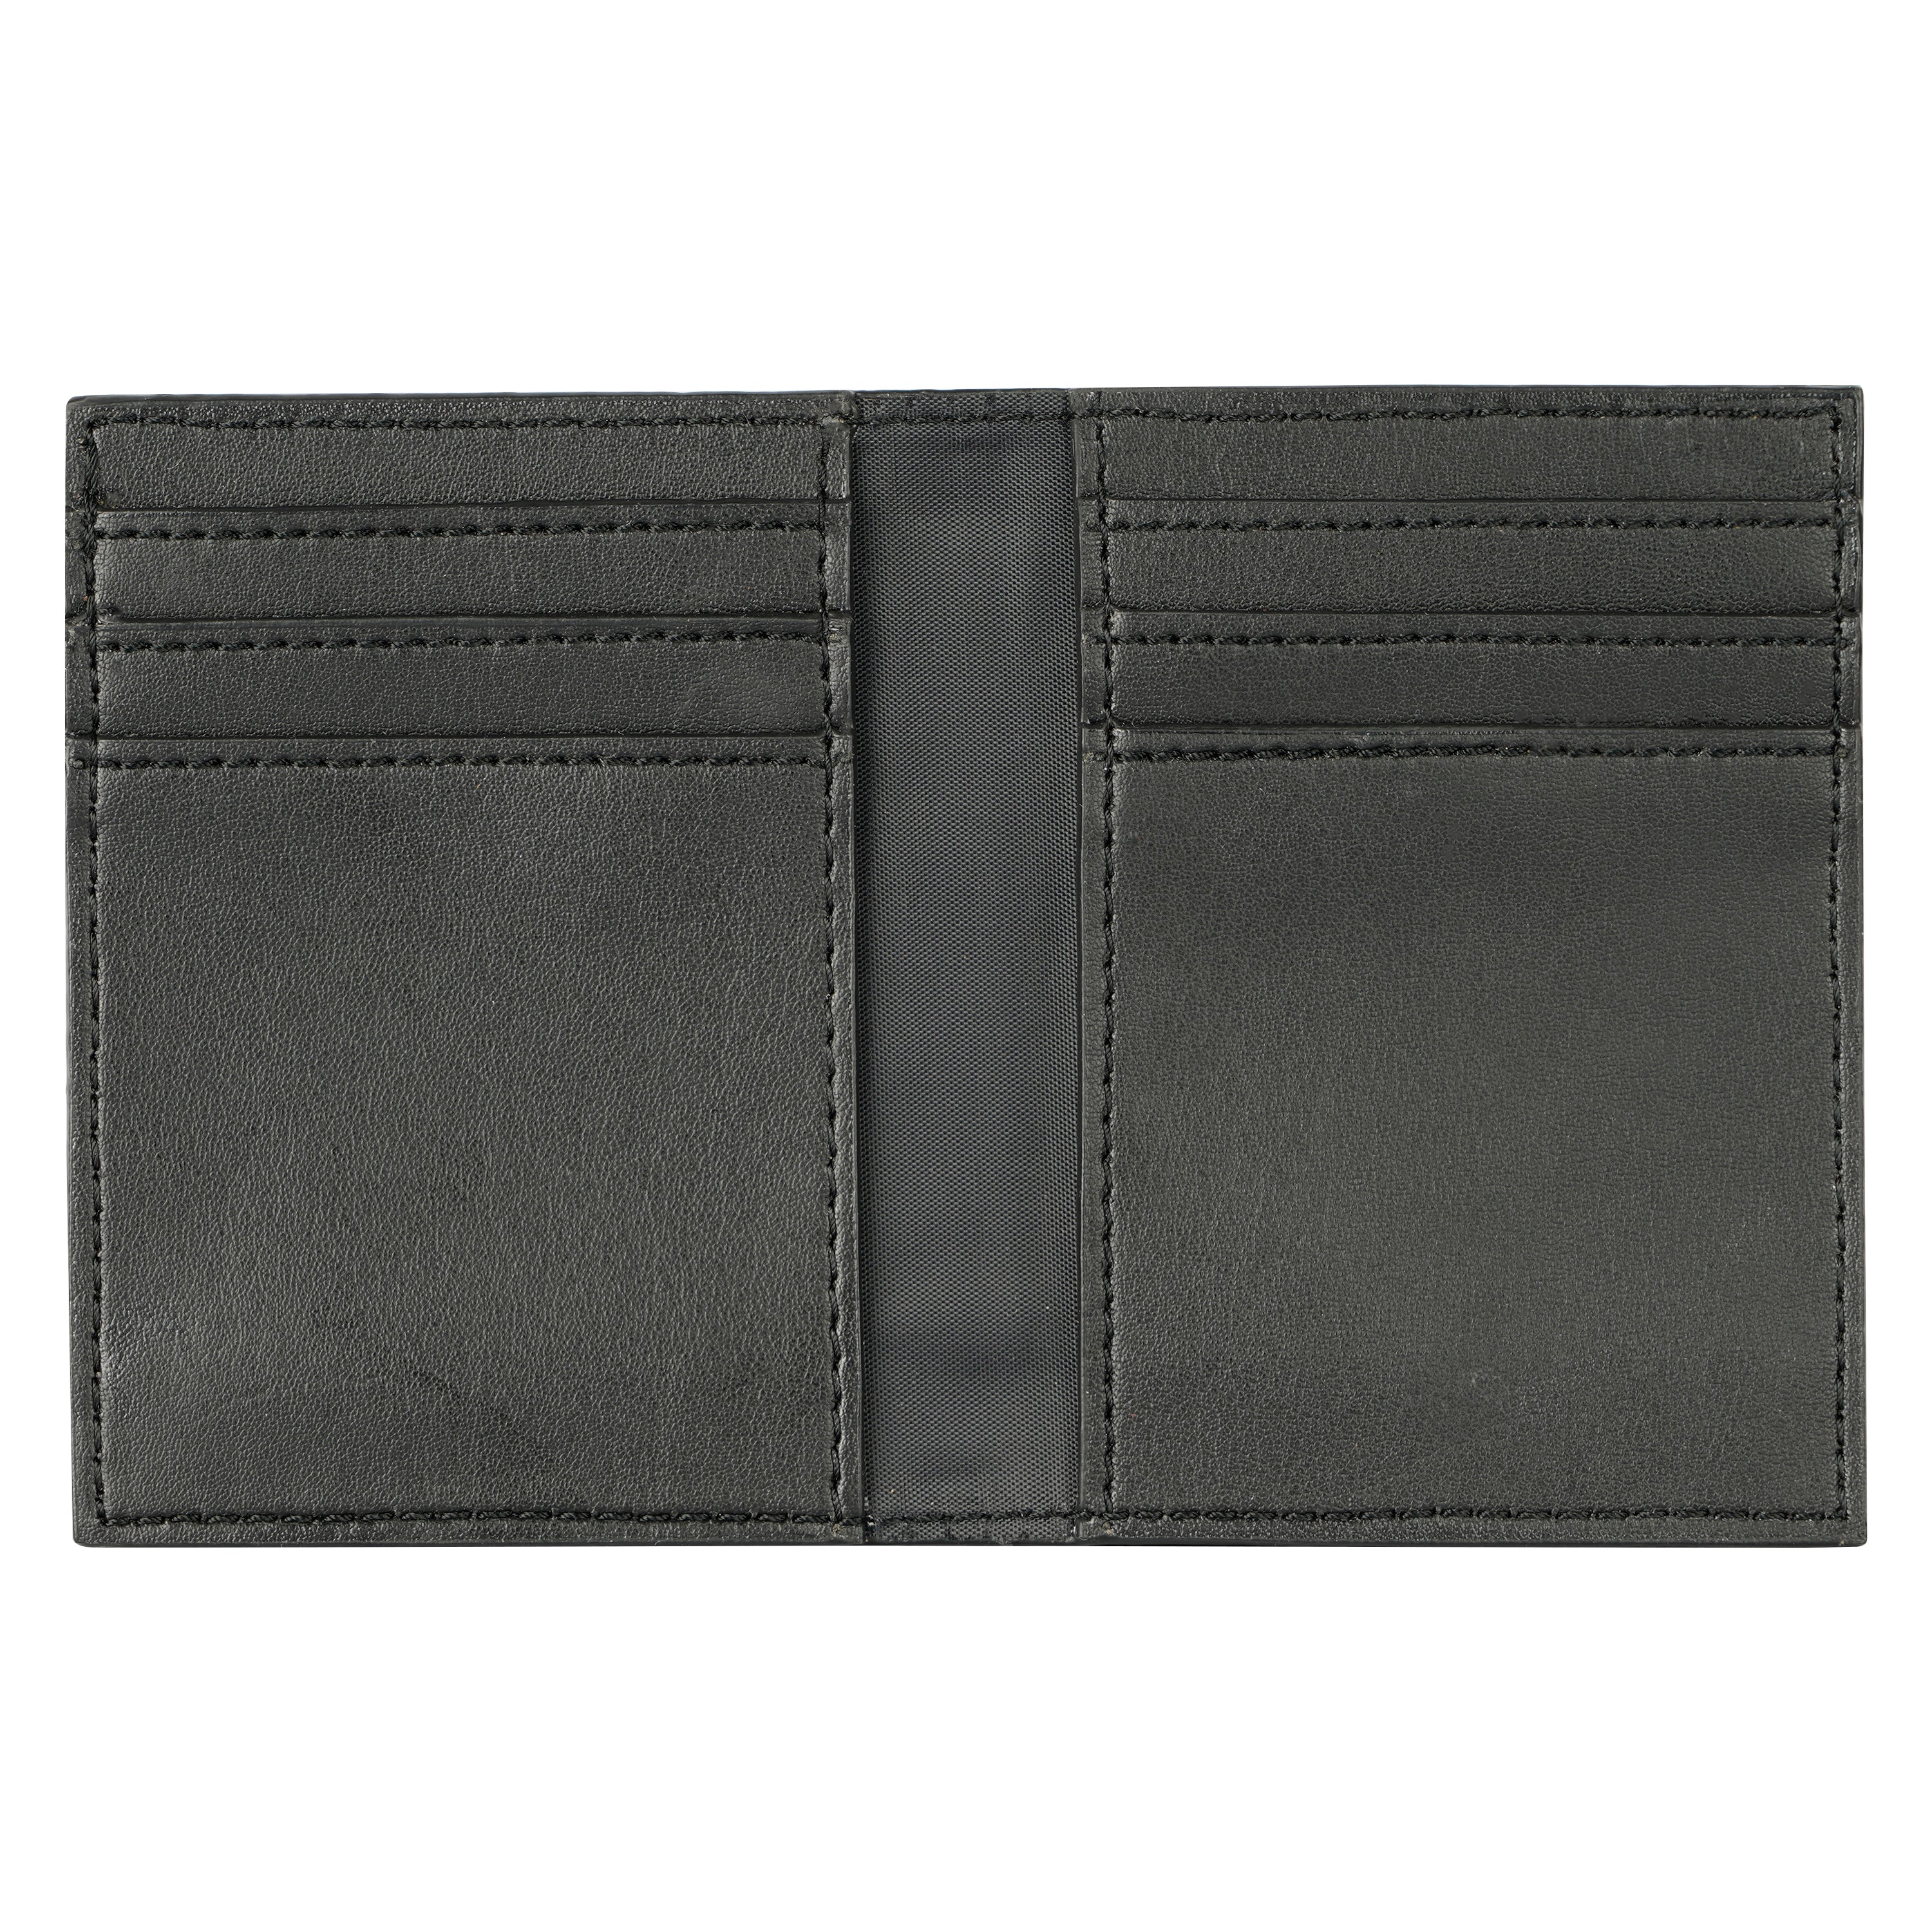 Cactus Leather BiFold Card Wallet - Black-1